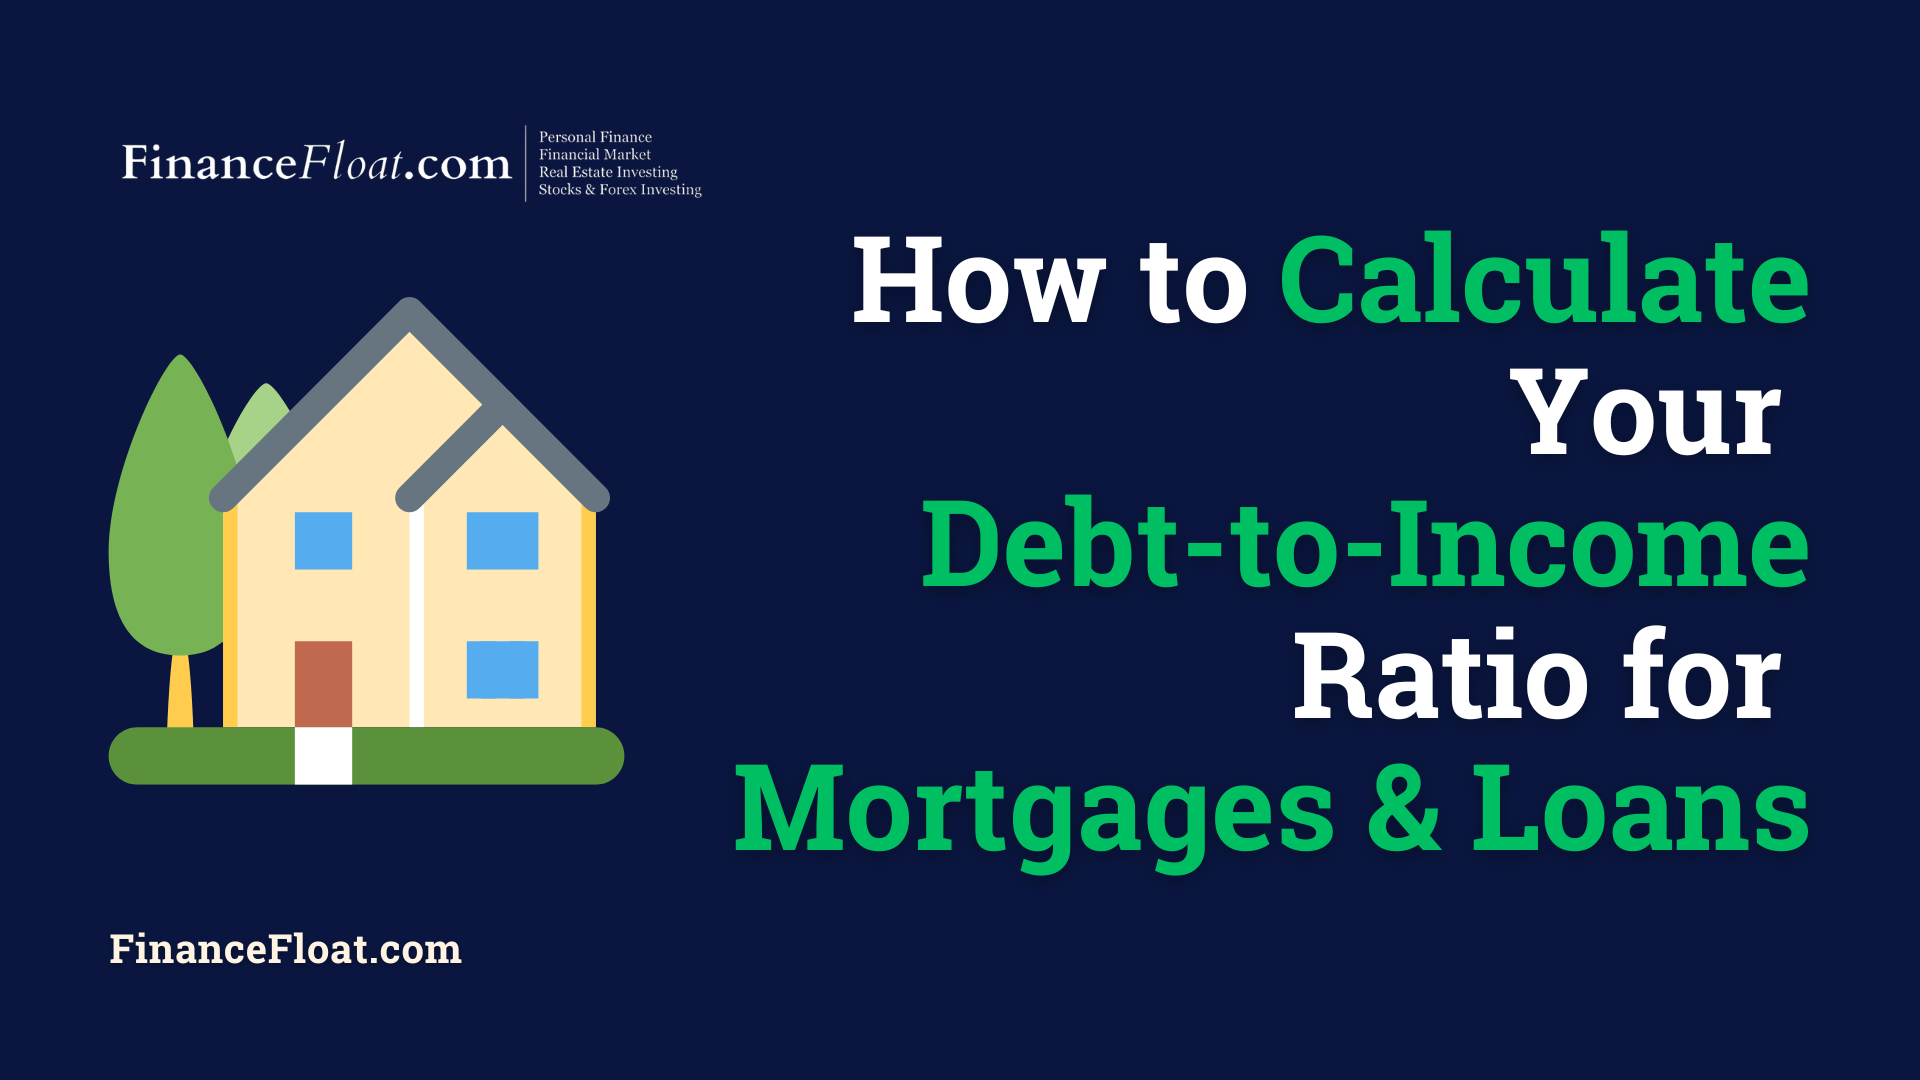 How to Calculate Your Debt-to-Income Ratio for Mortgages & Loans